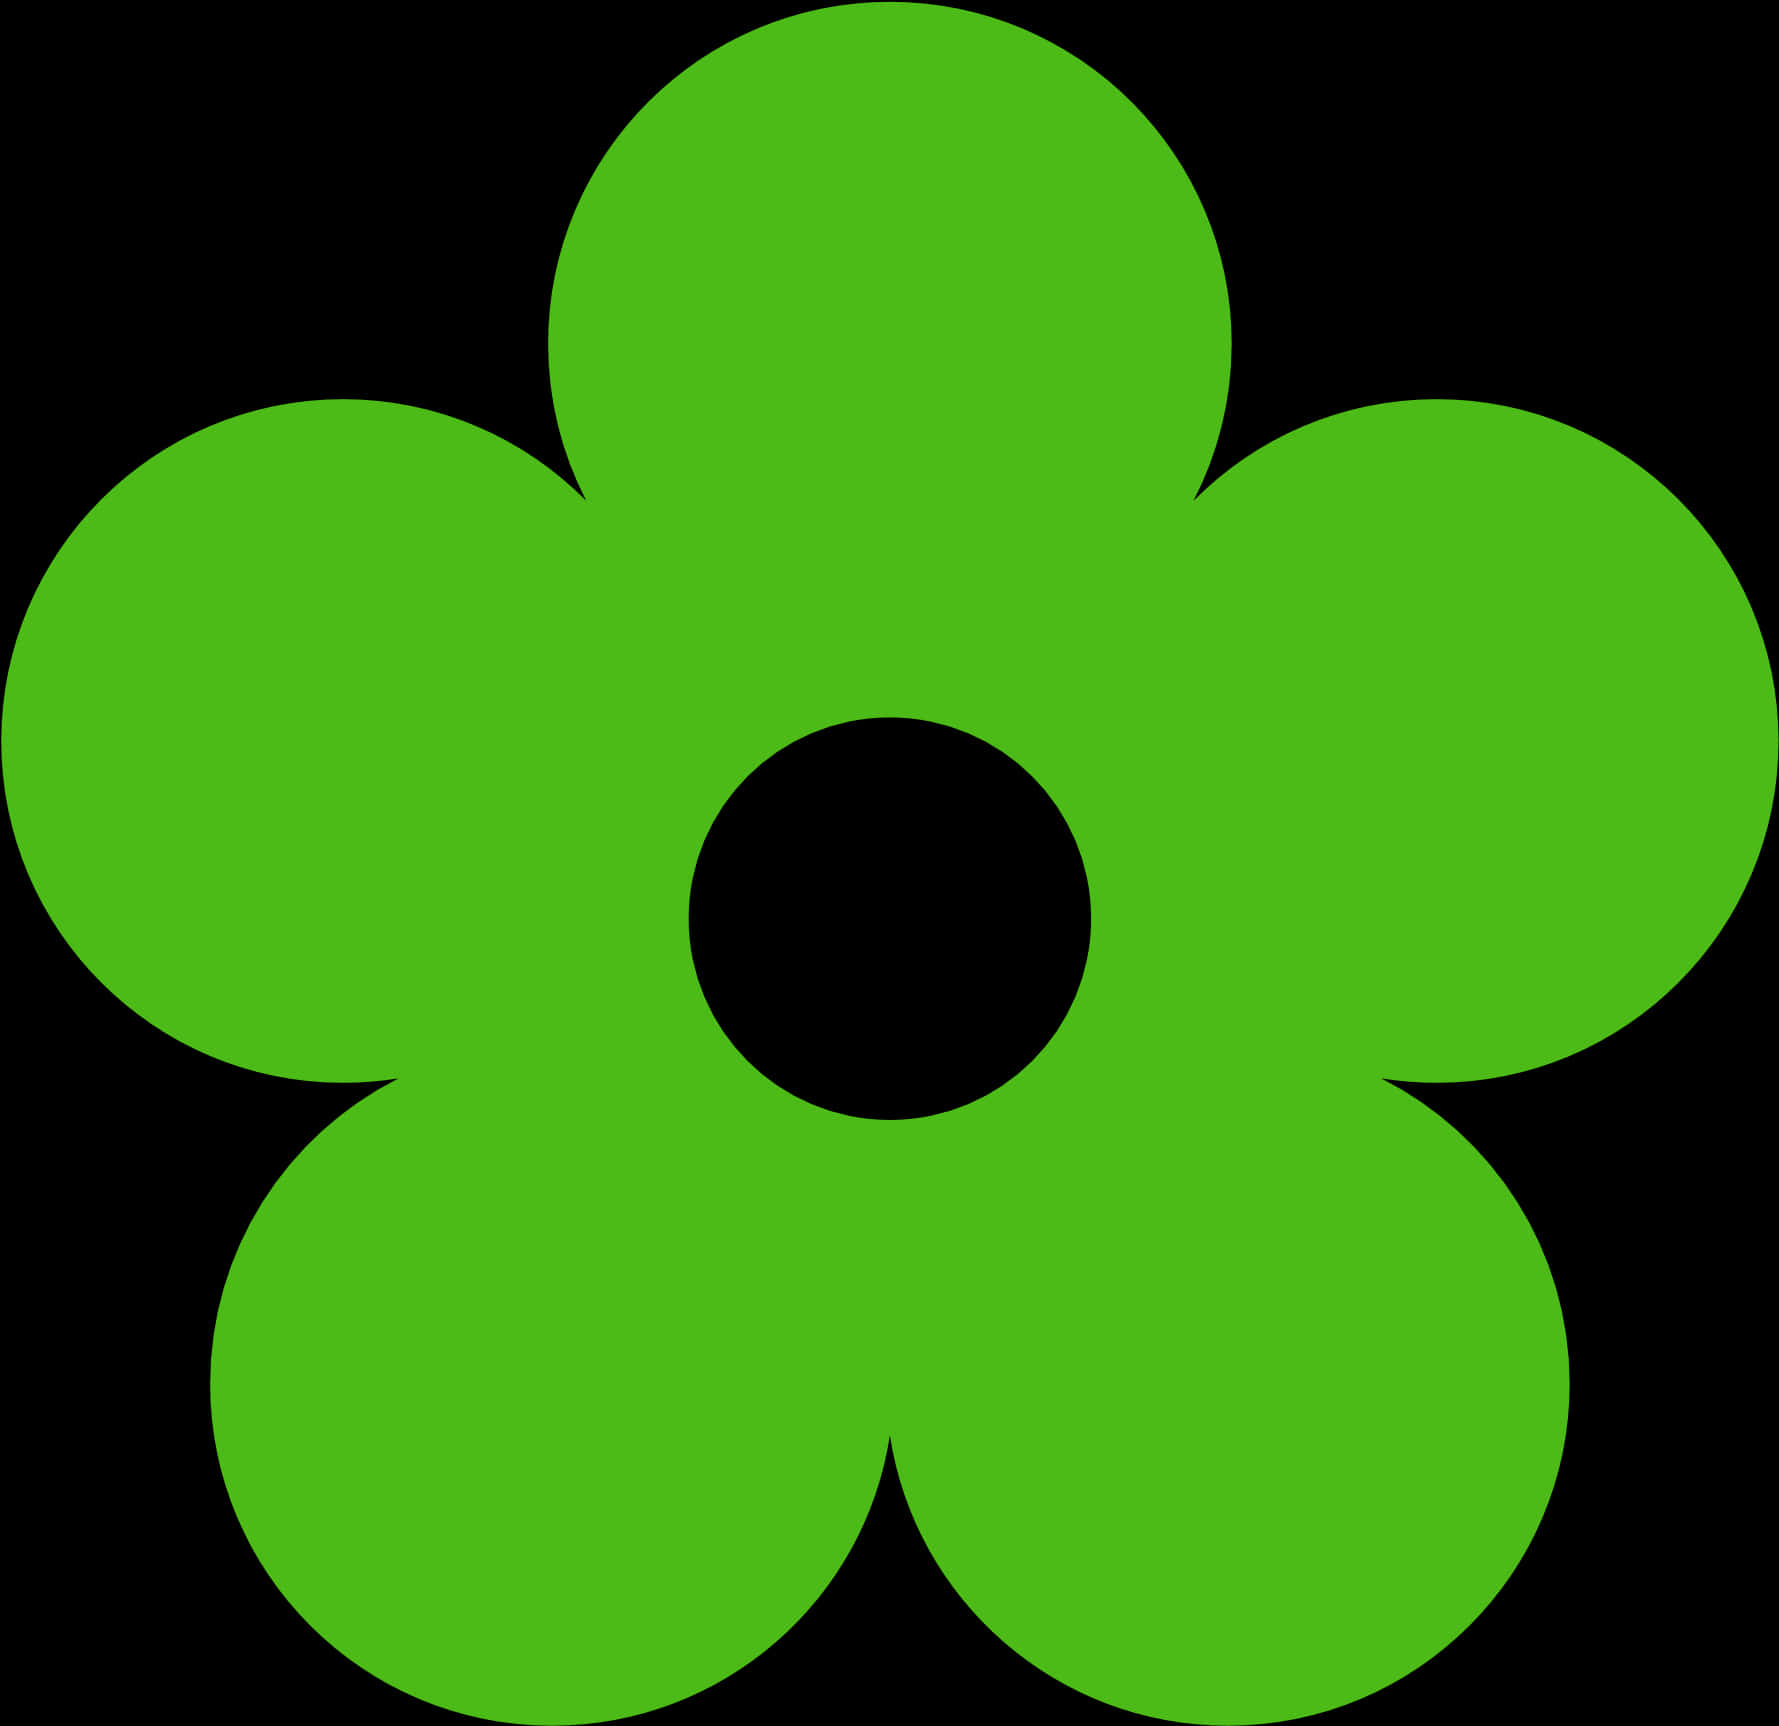 All About Clipart Flower - Green Flower Clip Art, Hd Png Download